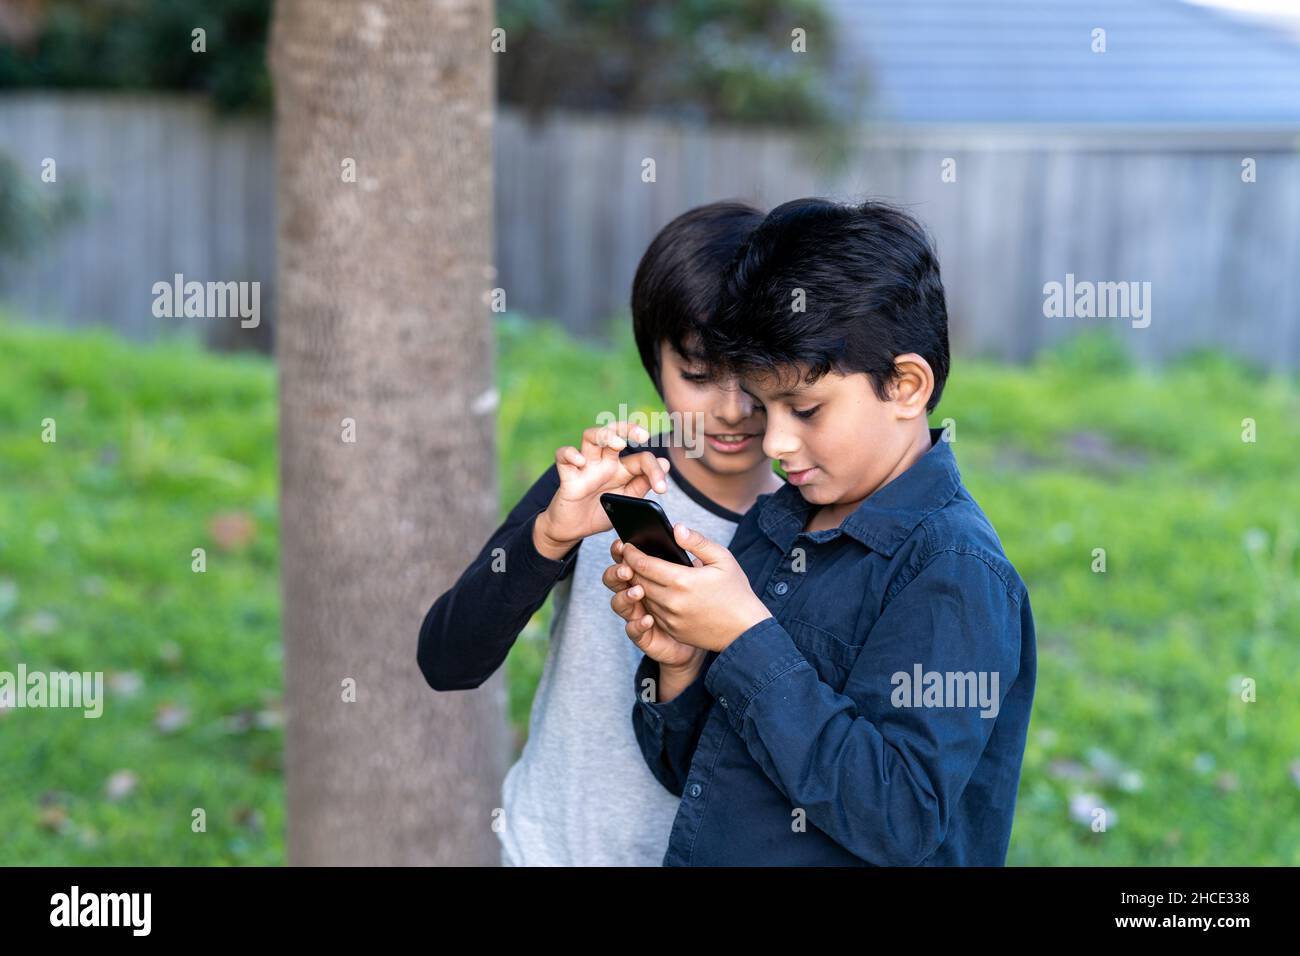 Two young kids using mobile phone. Curious children looking at mobile phone. Stock Photo